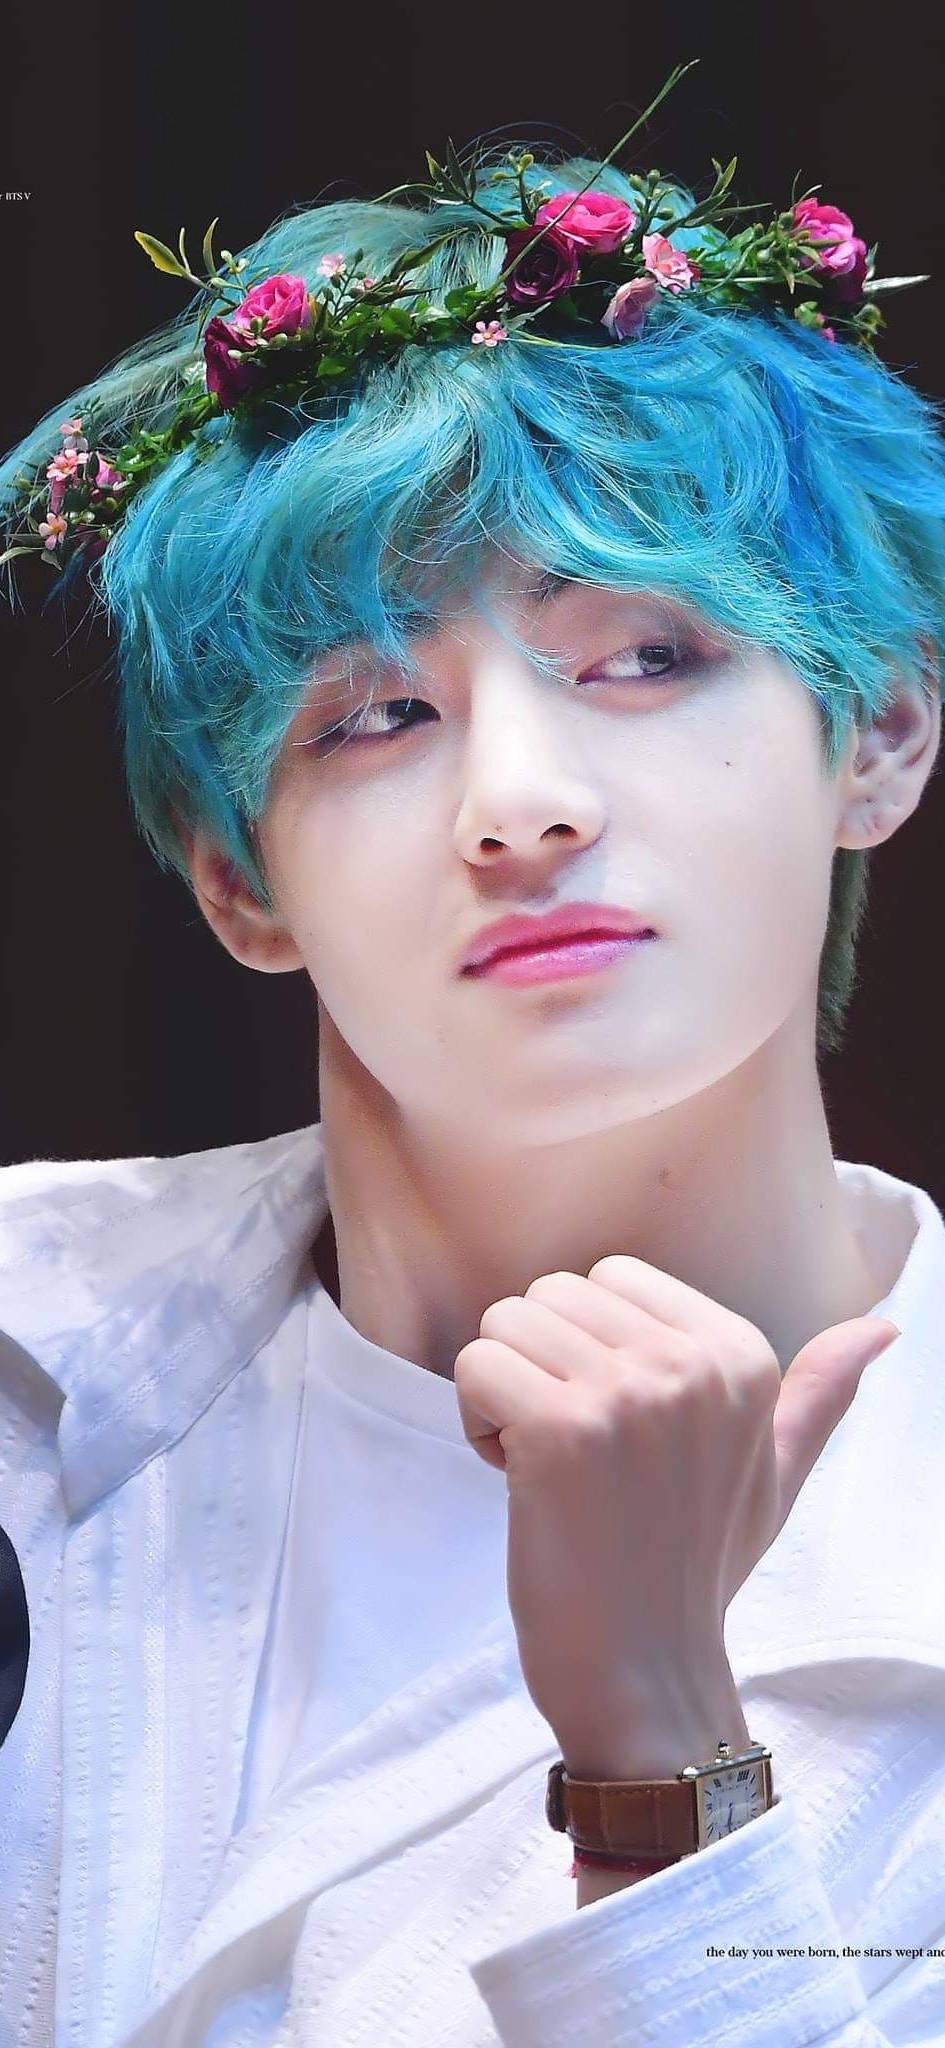 What Is Cholinergic Urticaria? Find Out About the Skin Condition BTS Member  V Has | Teen Vogue